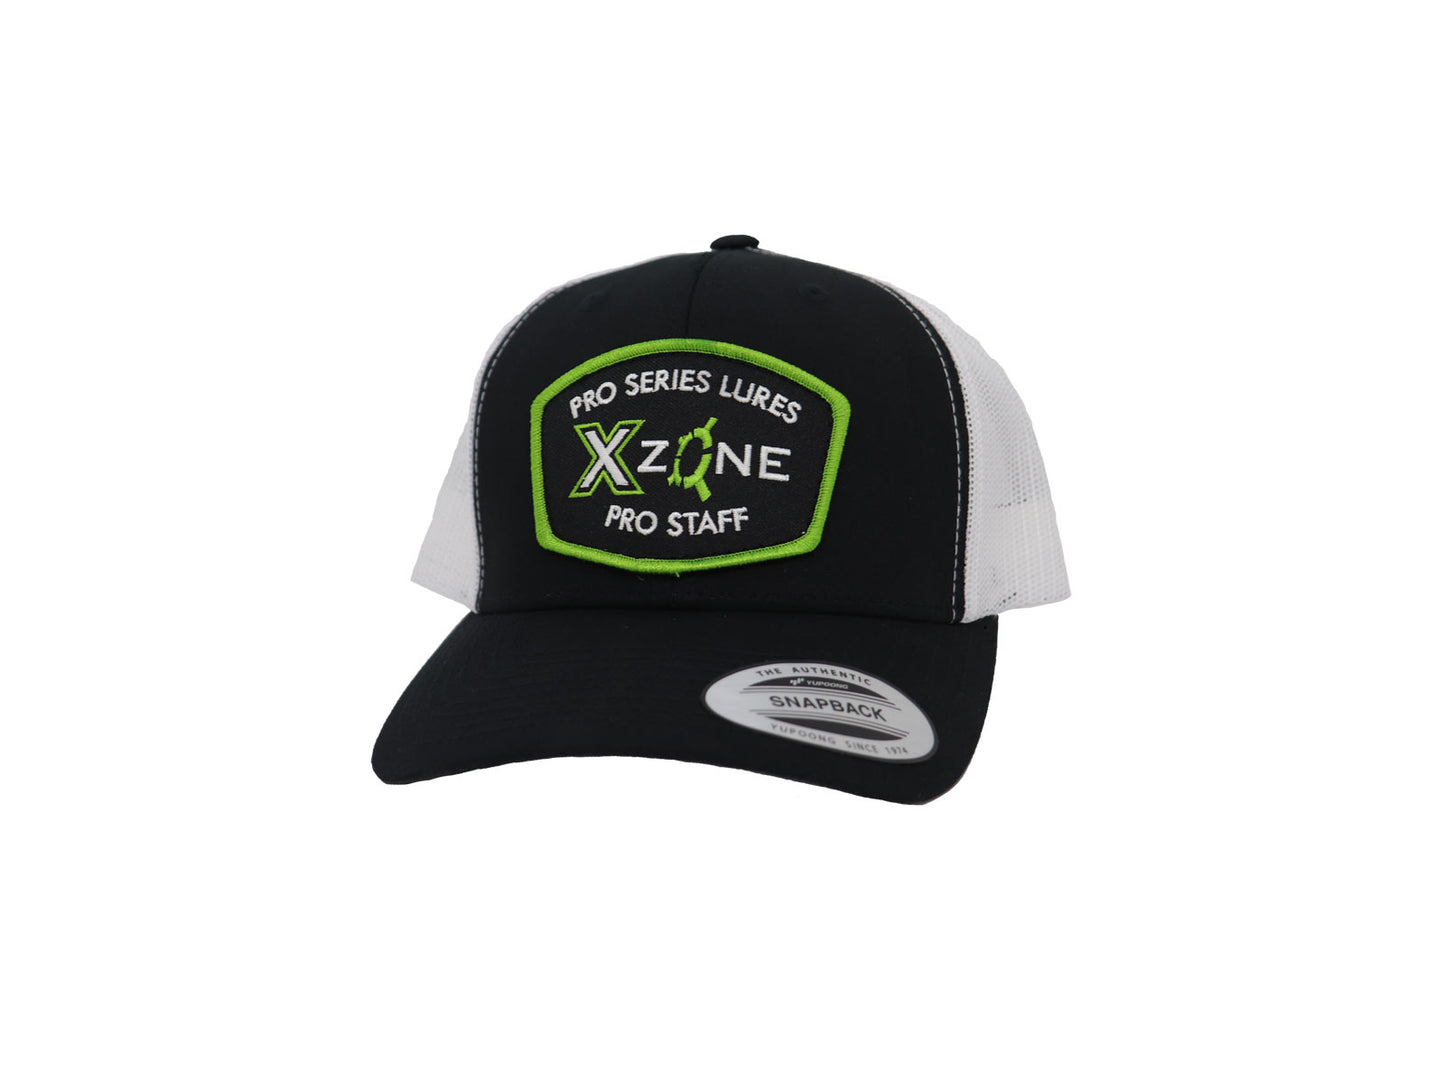 X Zone Lures Pro Staff Branded Hat